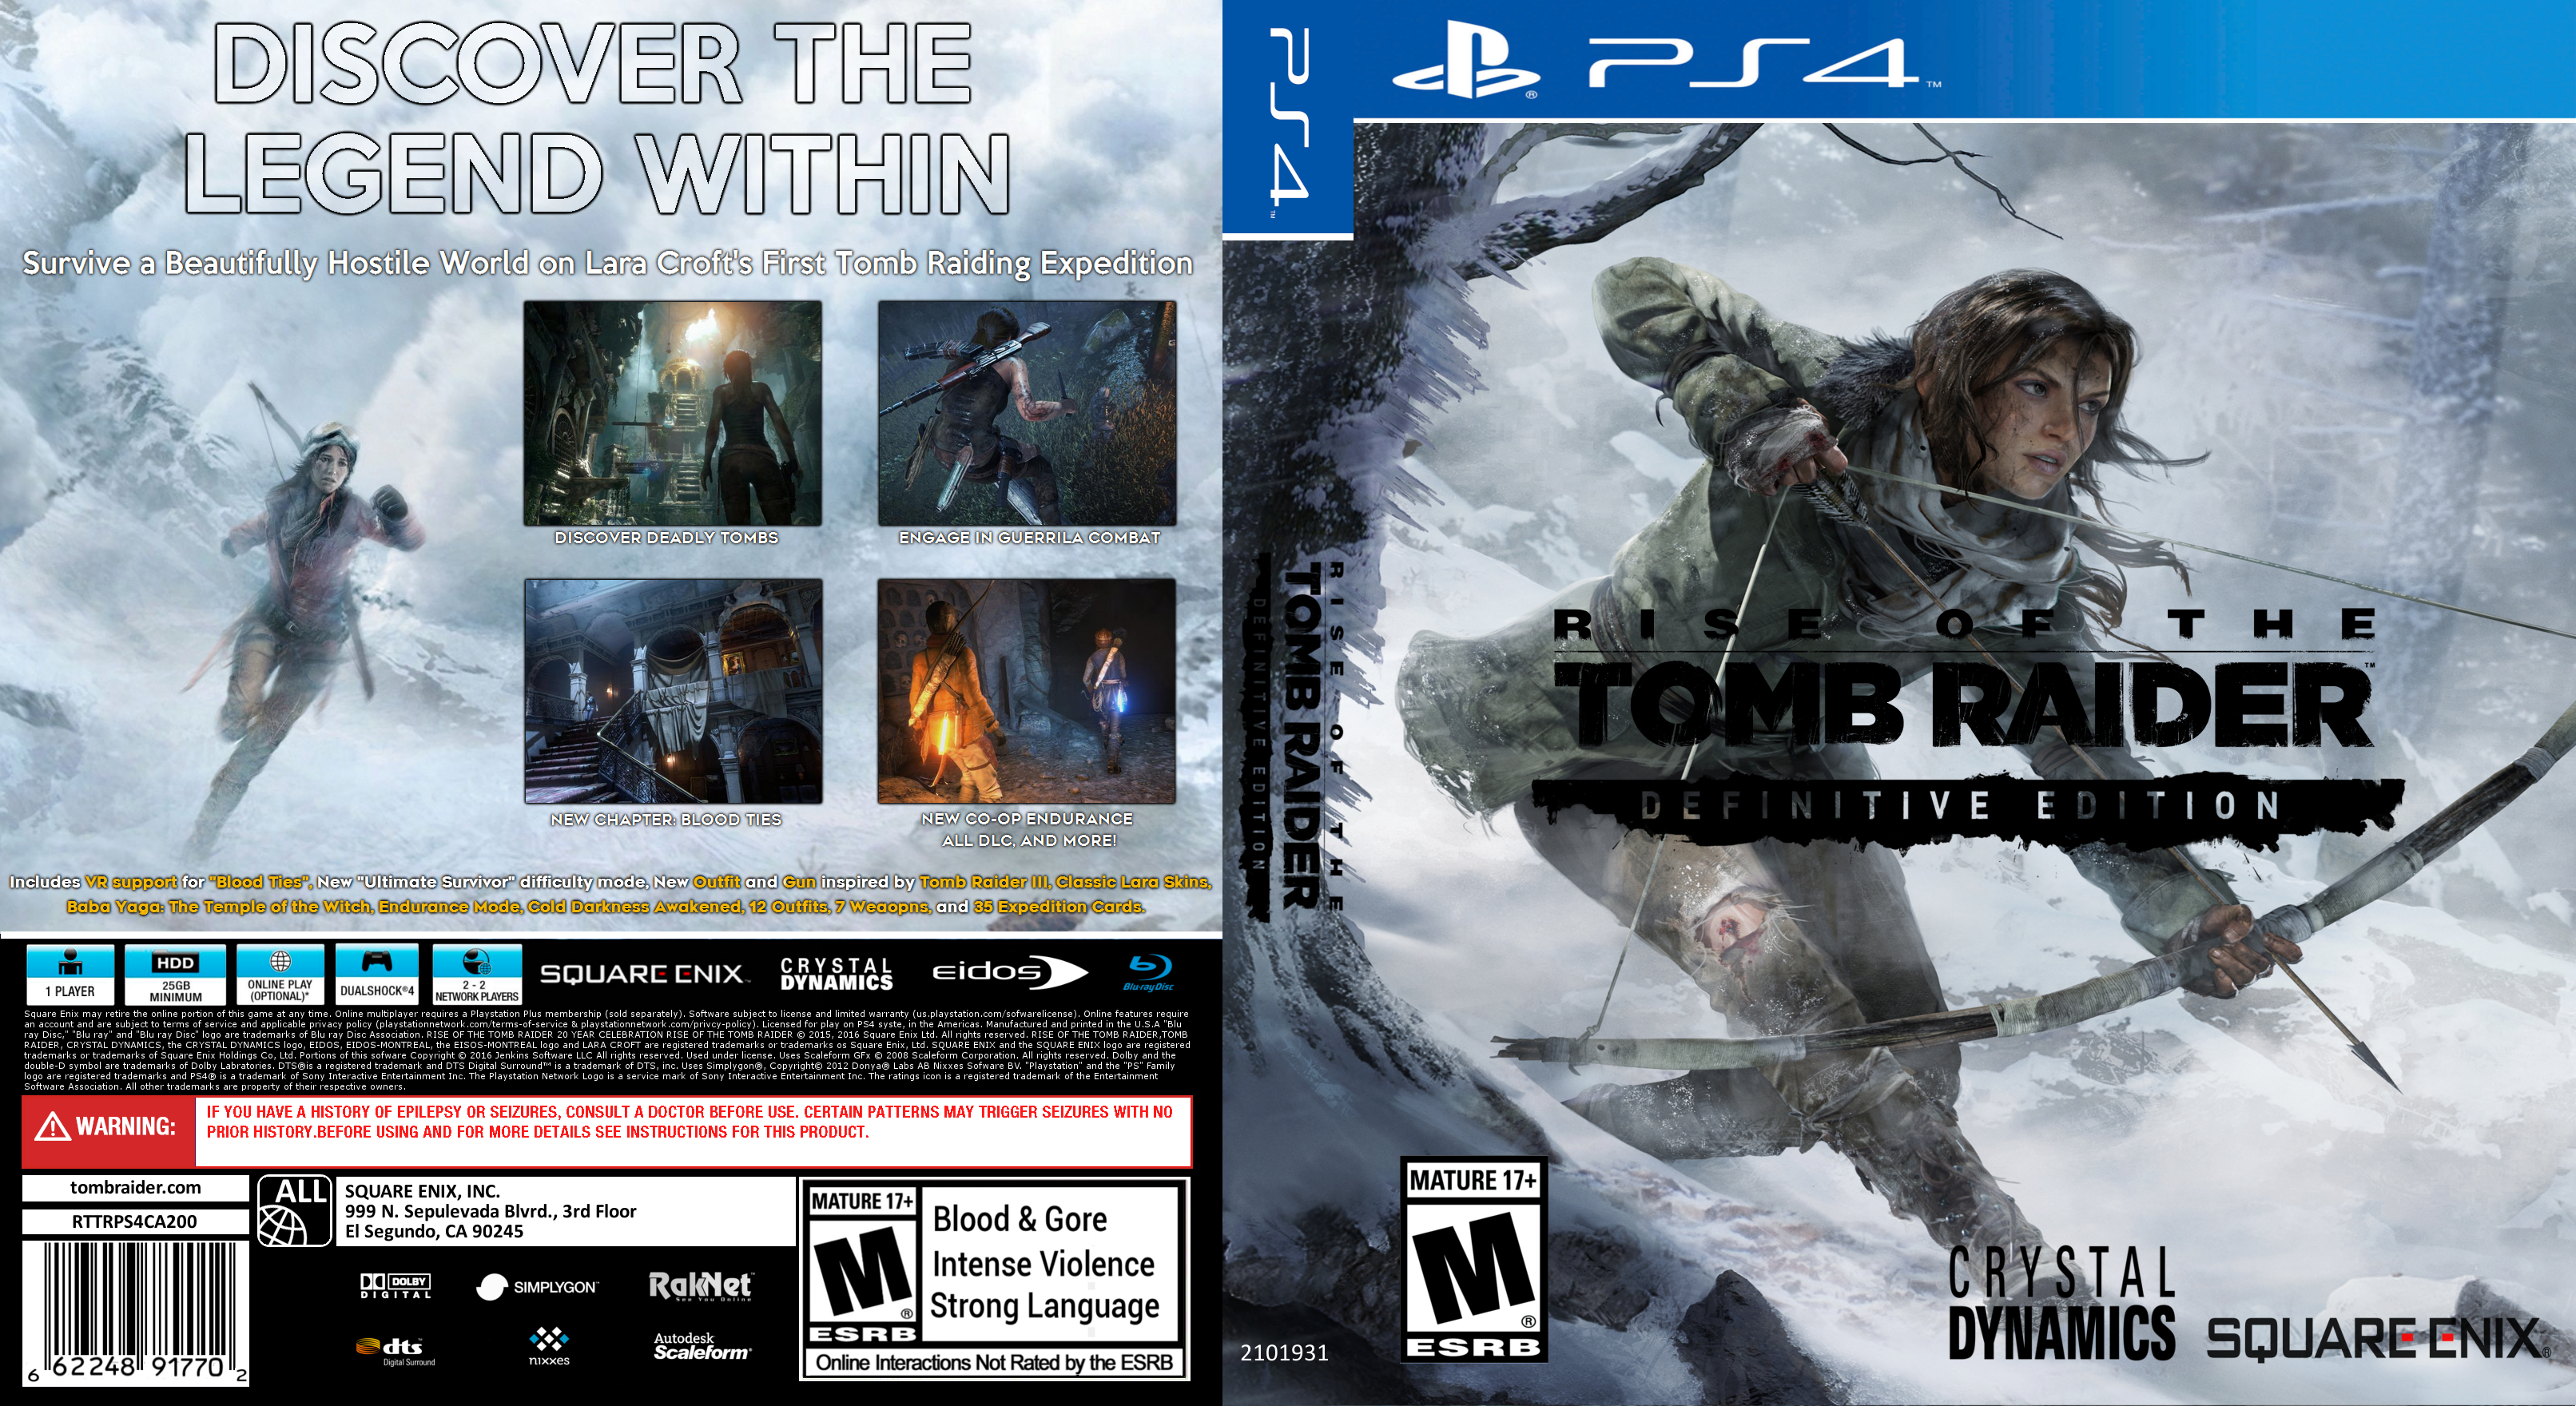 Rise of the Tomb Raider: 20 Year Celebration box cover